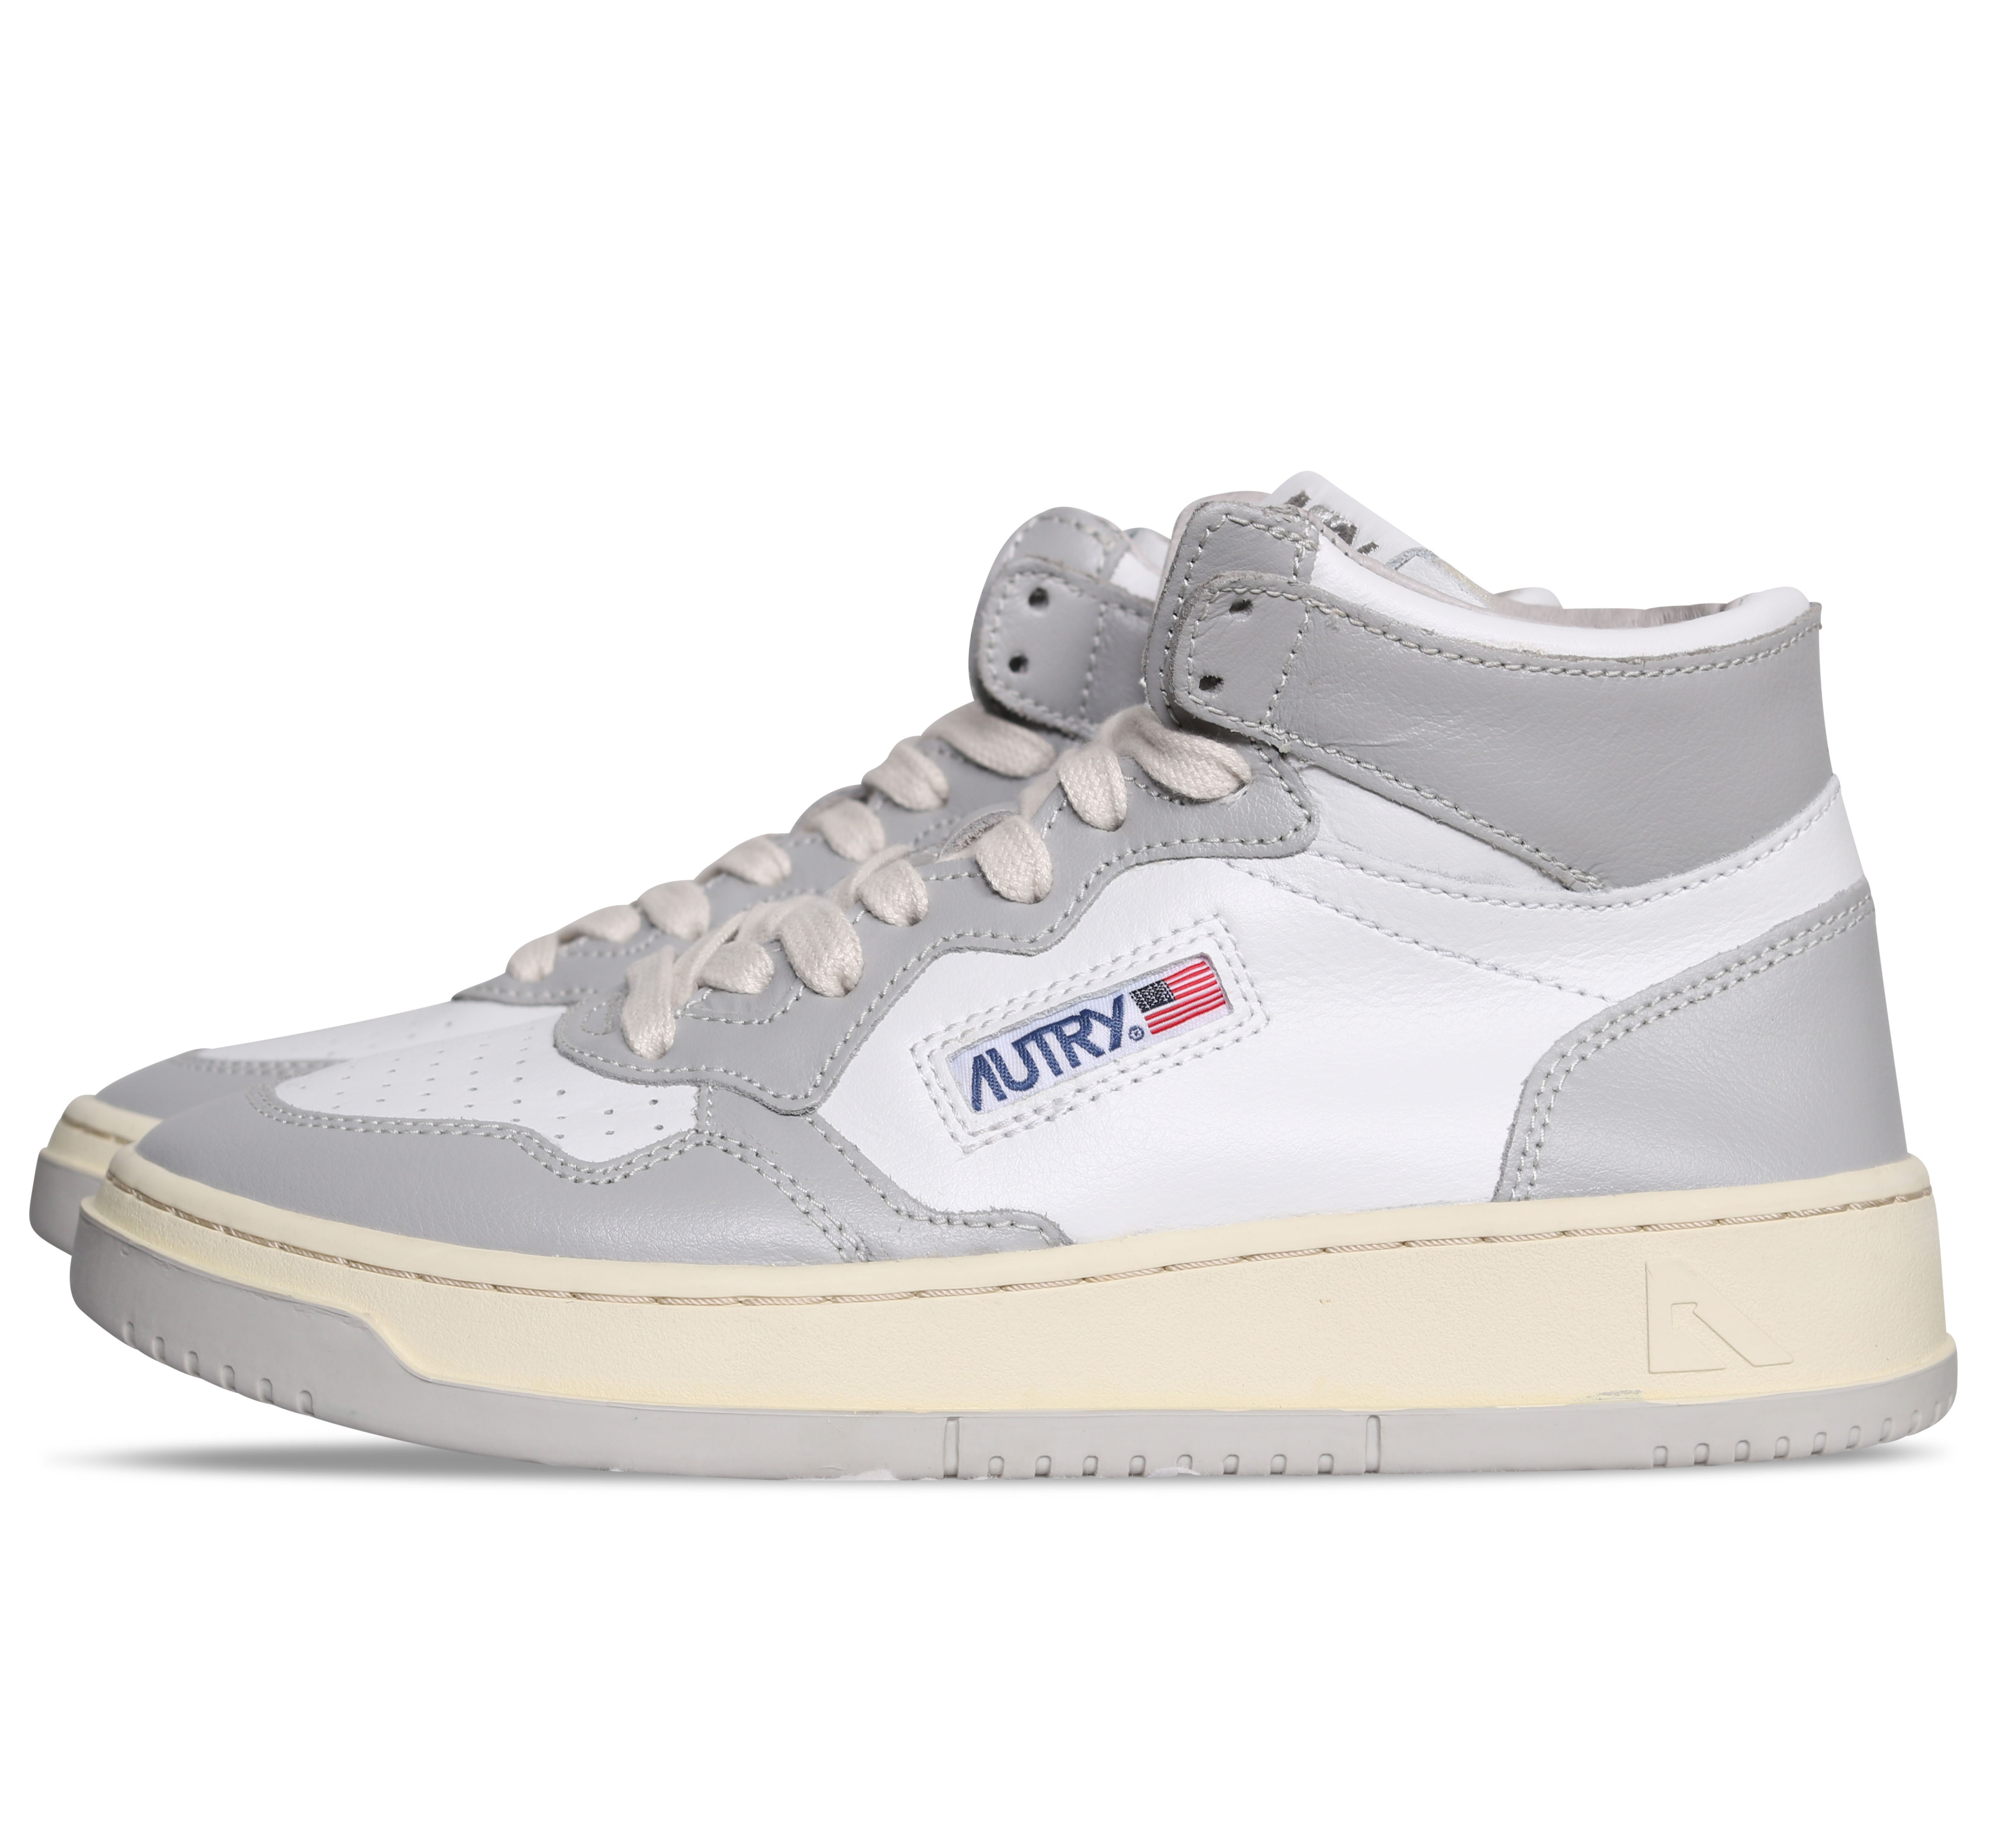 Autry Action Shoes Mid Sneaker White/Grey